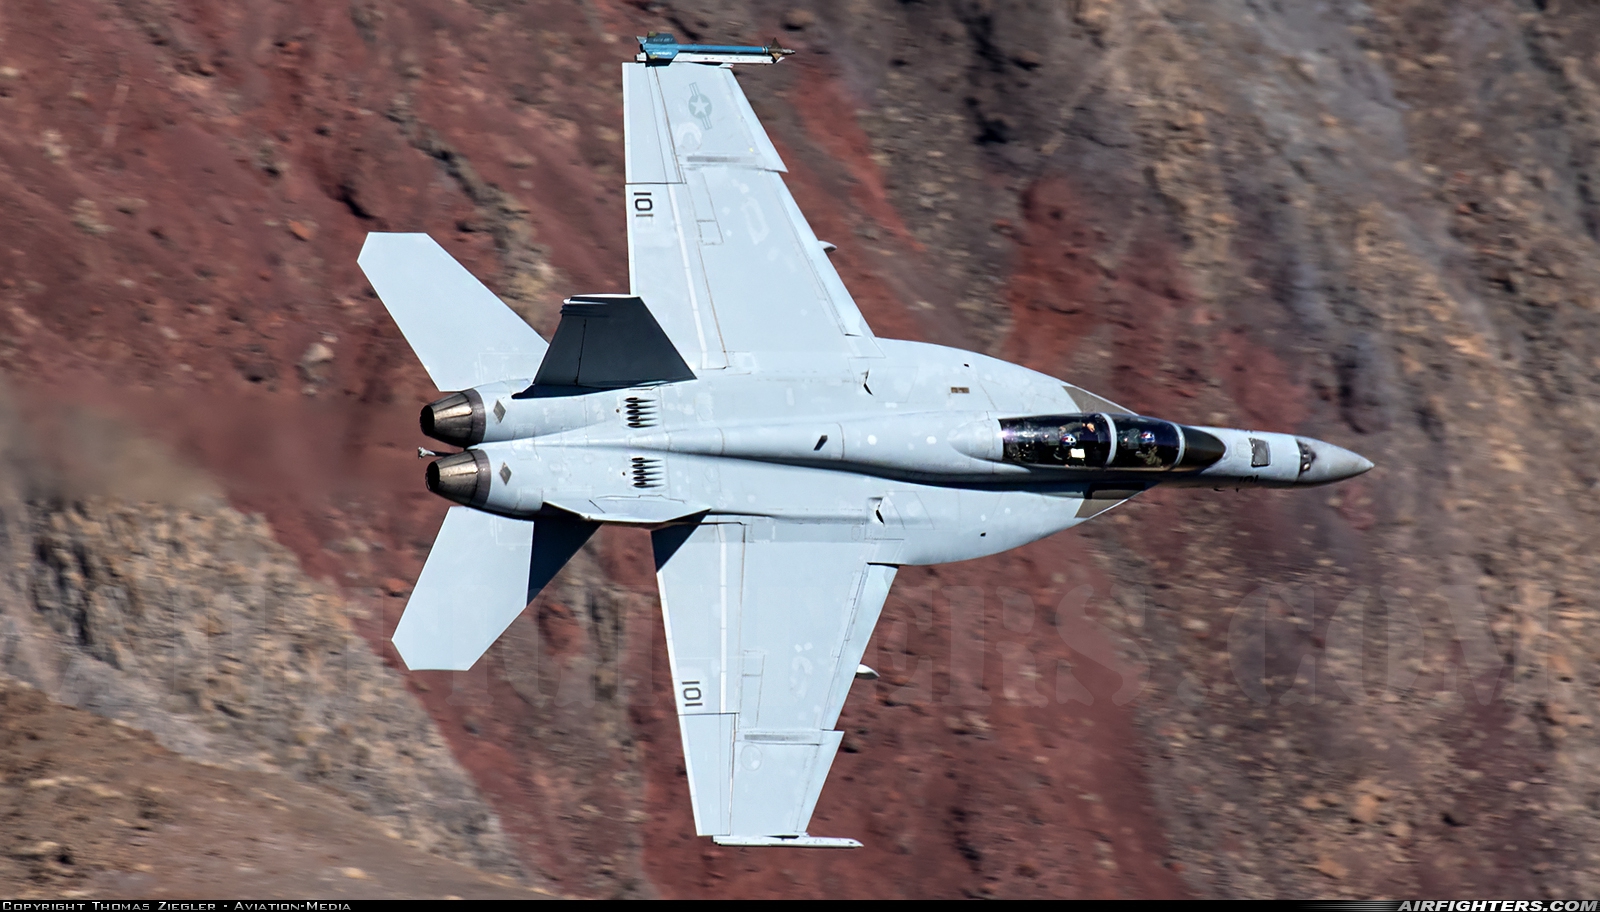 USA - Navy Boeing F/A-18F Super Hornet 166975 at Off-Airport - Rainbow Canyon area, USA